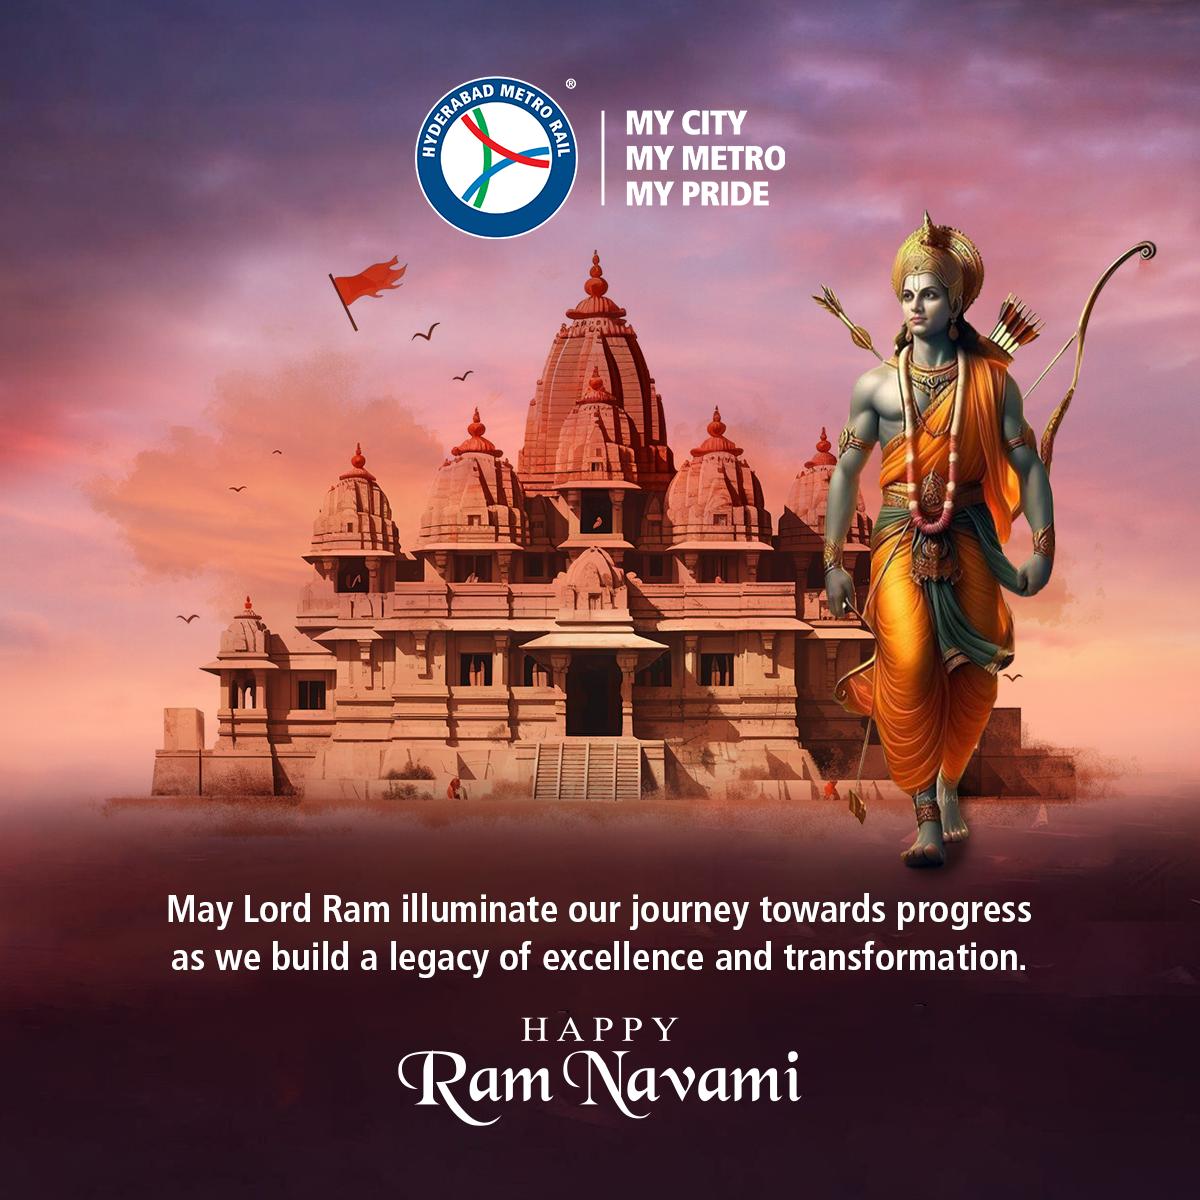 May the divine light of Lord Ram guide our path towards progress, as we strive to build a legacy of excellence and transformation for generations to come. #landtmetro #mycitymymetromypride #metroride